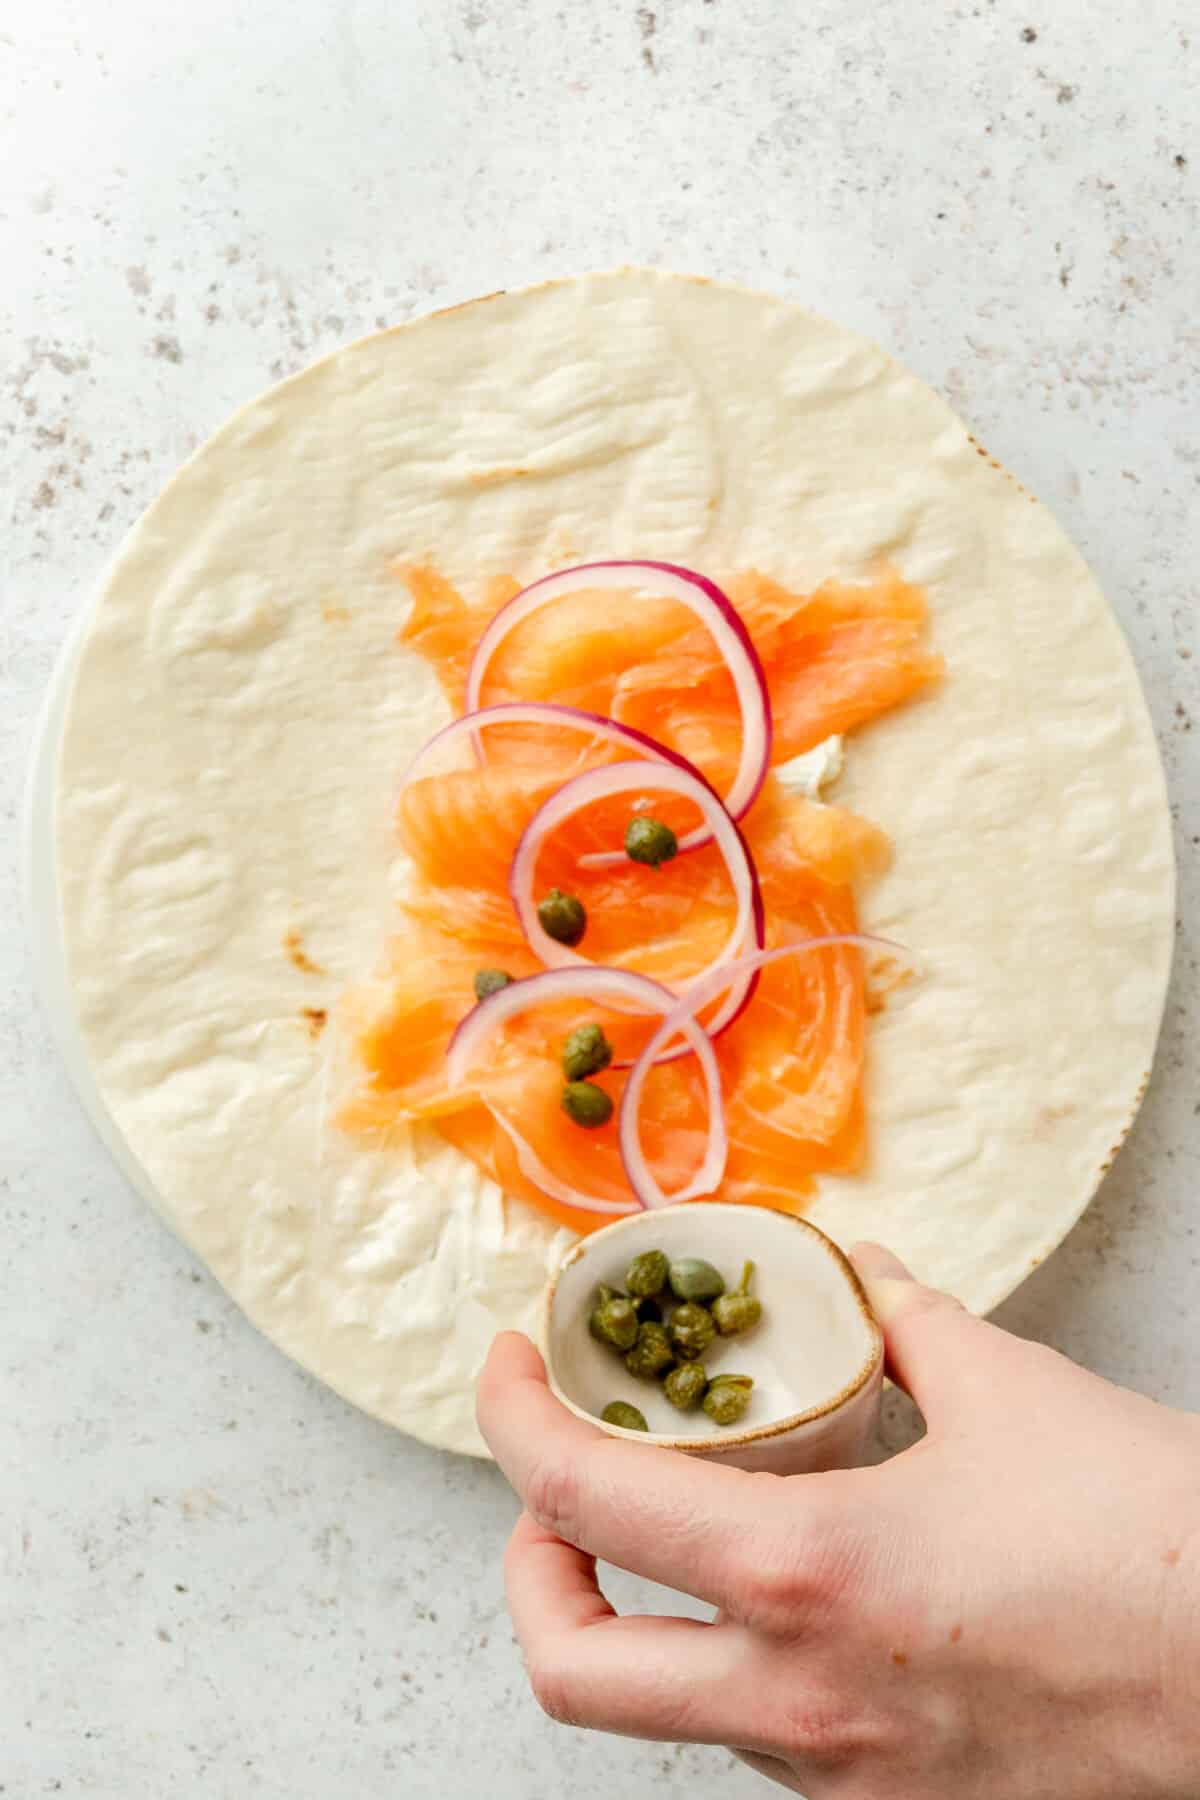 Capers are tossed over pieces of smoked salmon and slices of red onion on a wrap on a light grey surface.